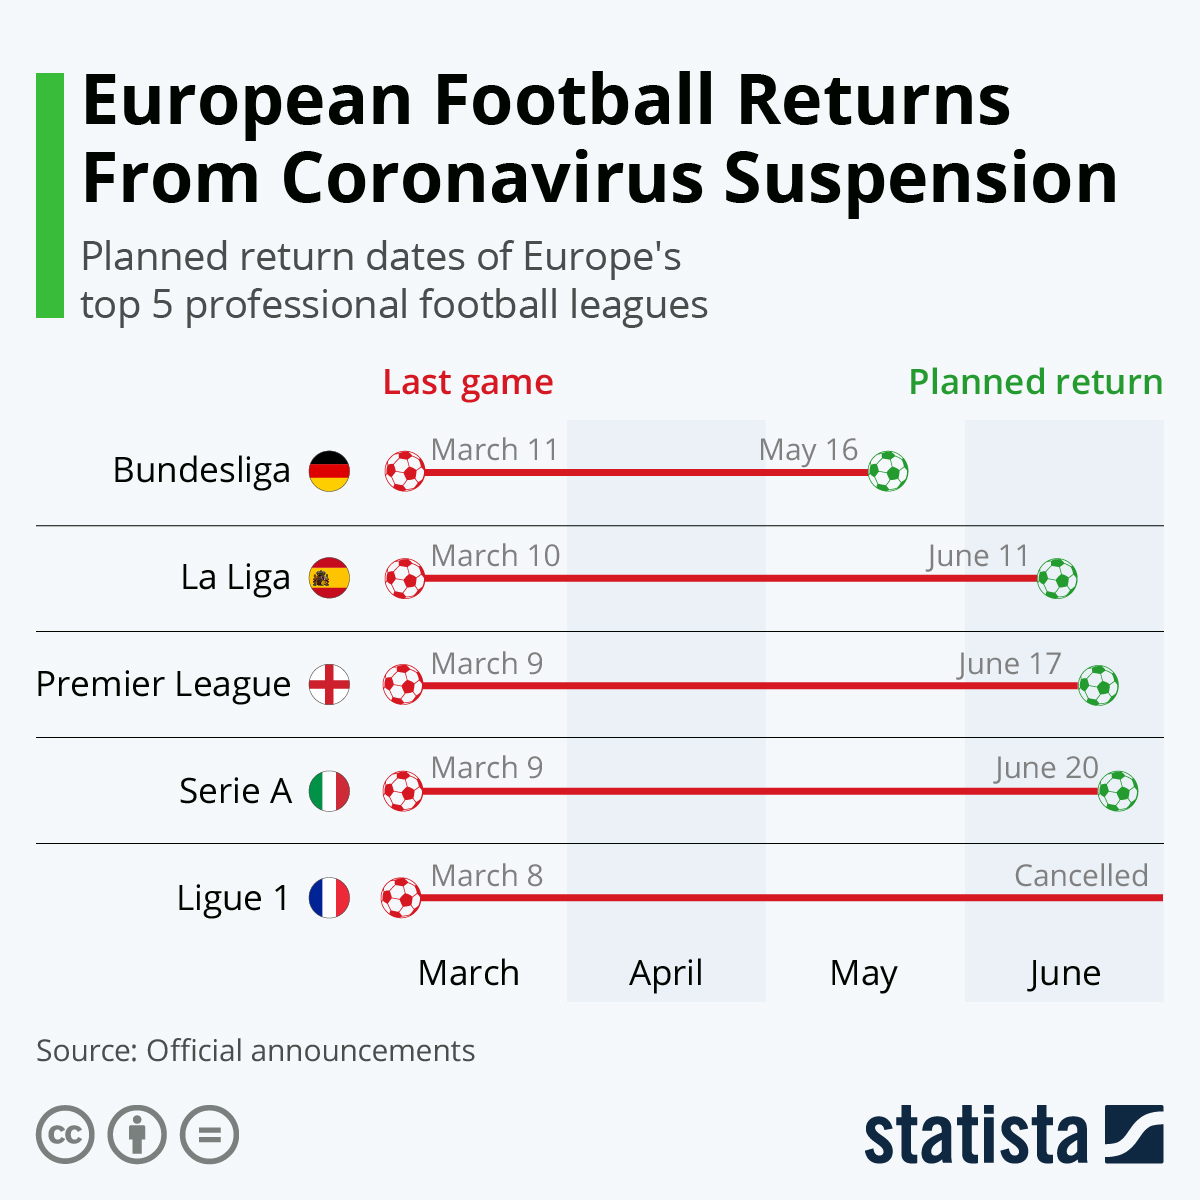 A Look At The Return Of Europe’s Top Football Leagues